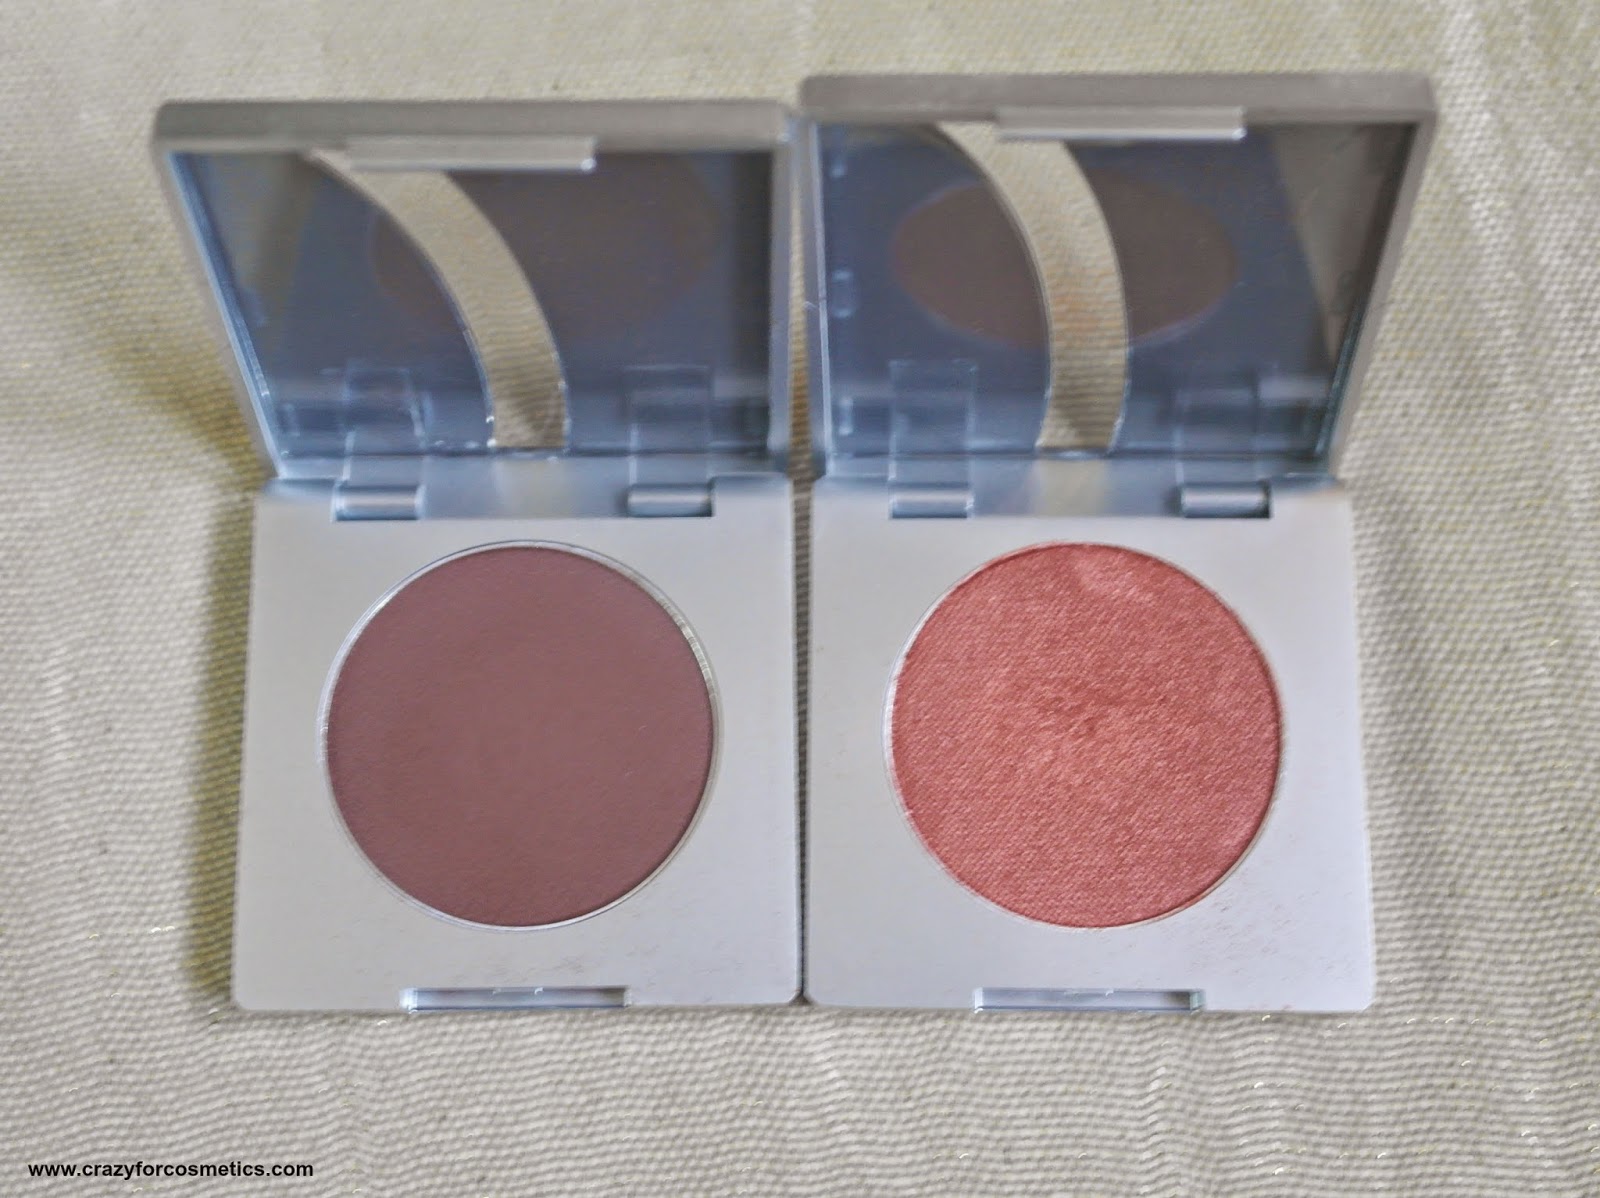 Kryolan professional eye shadow viva matte in anis and copper